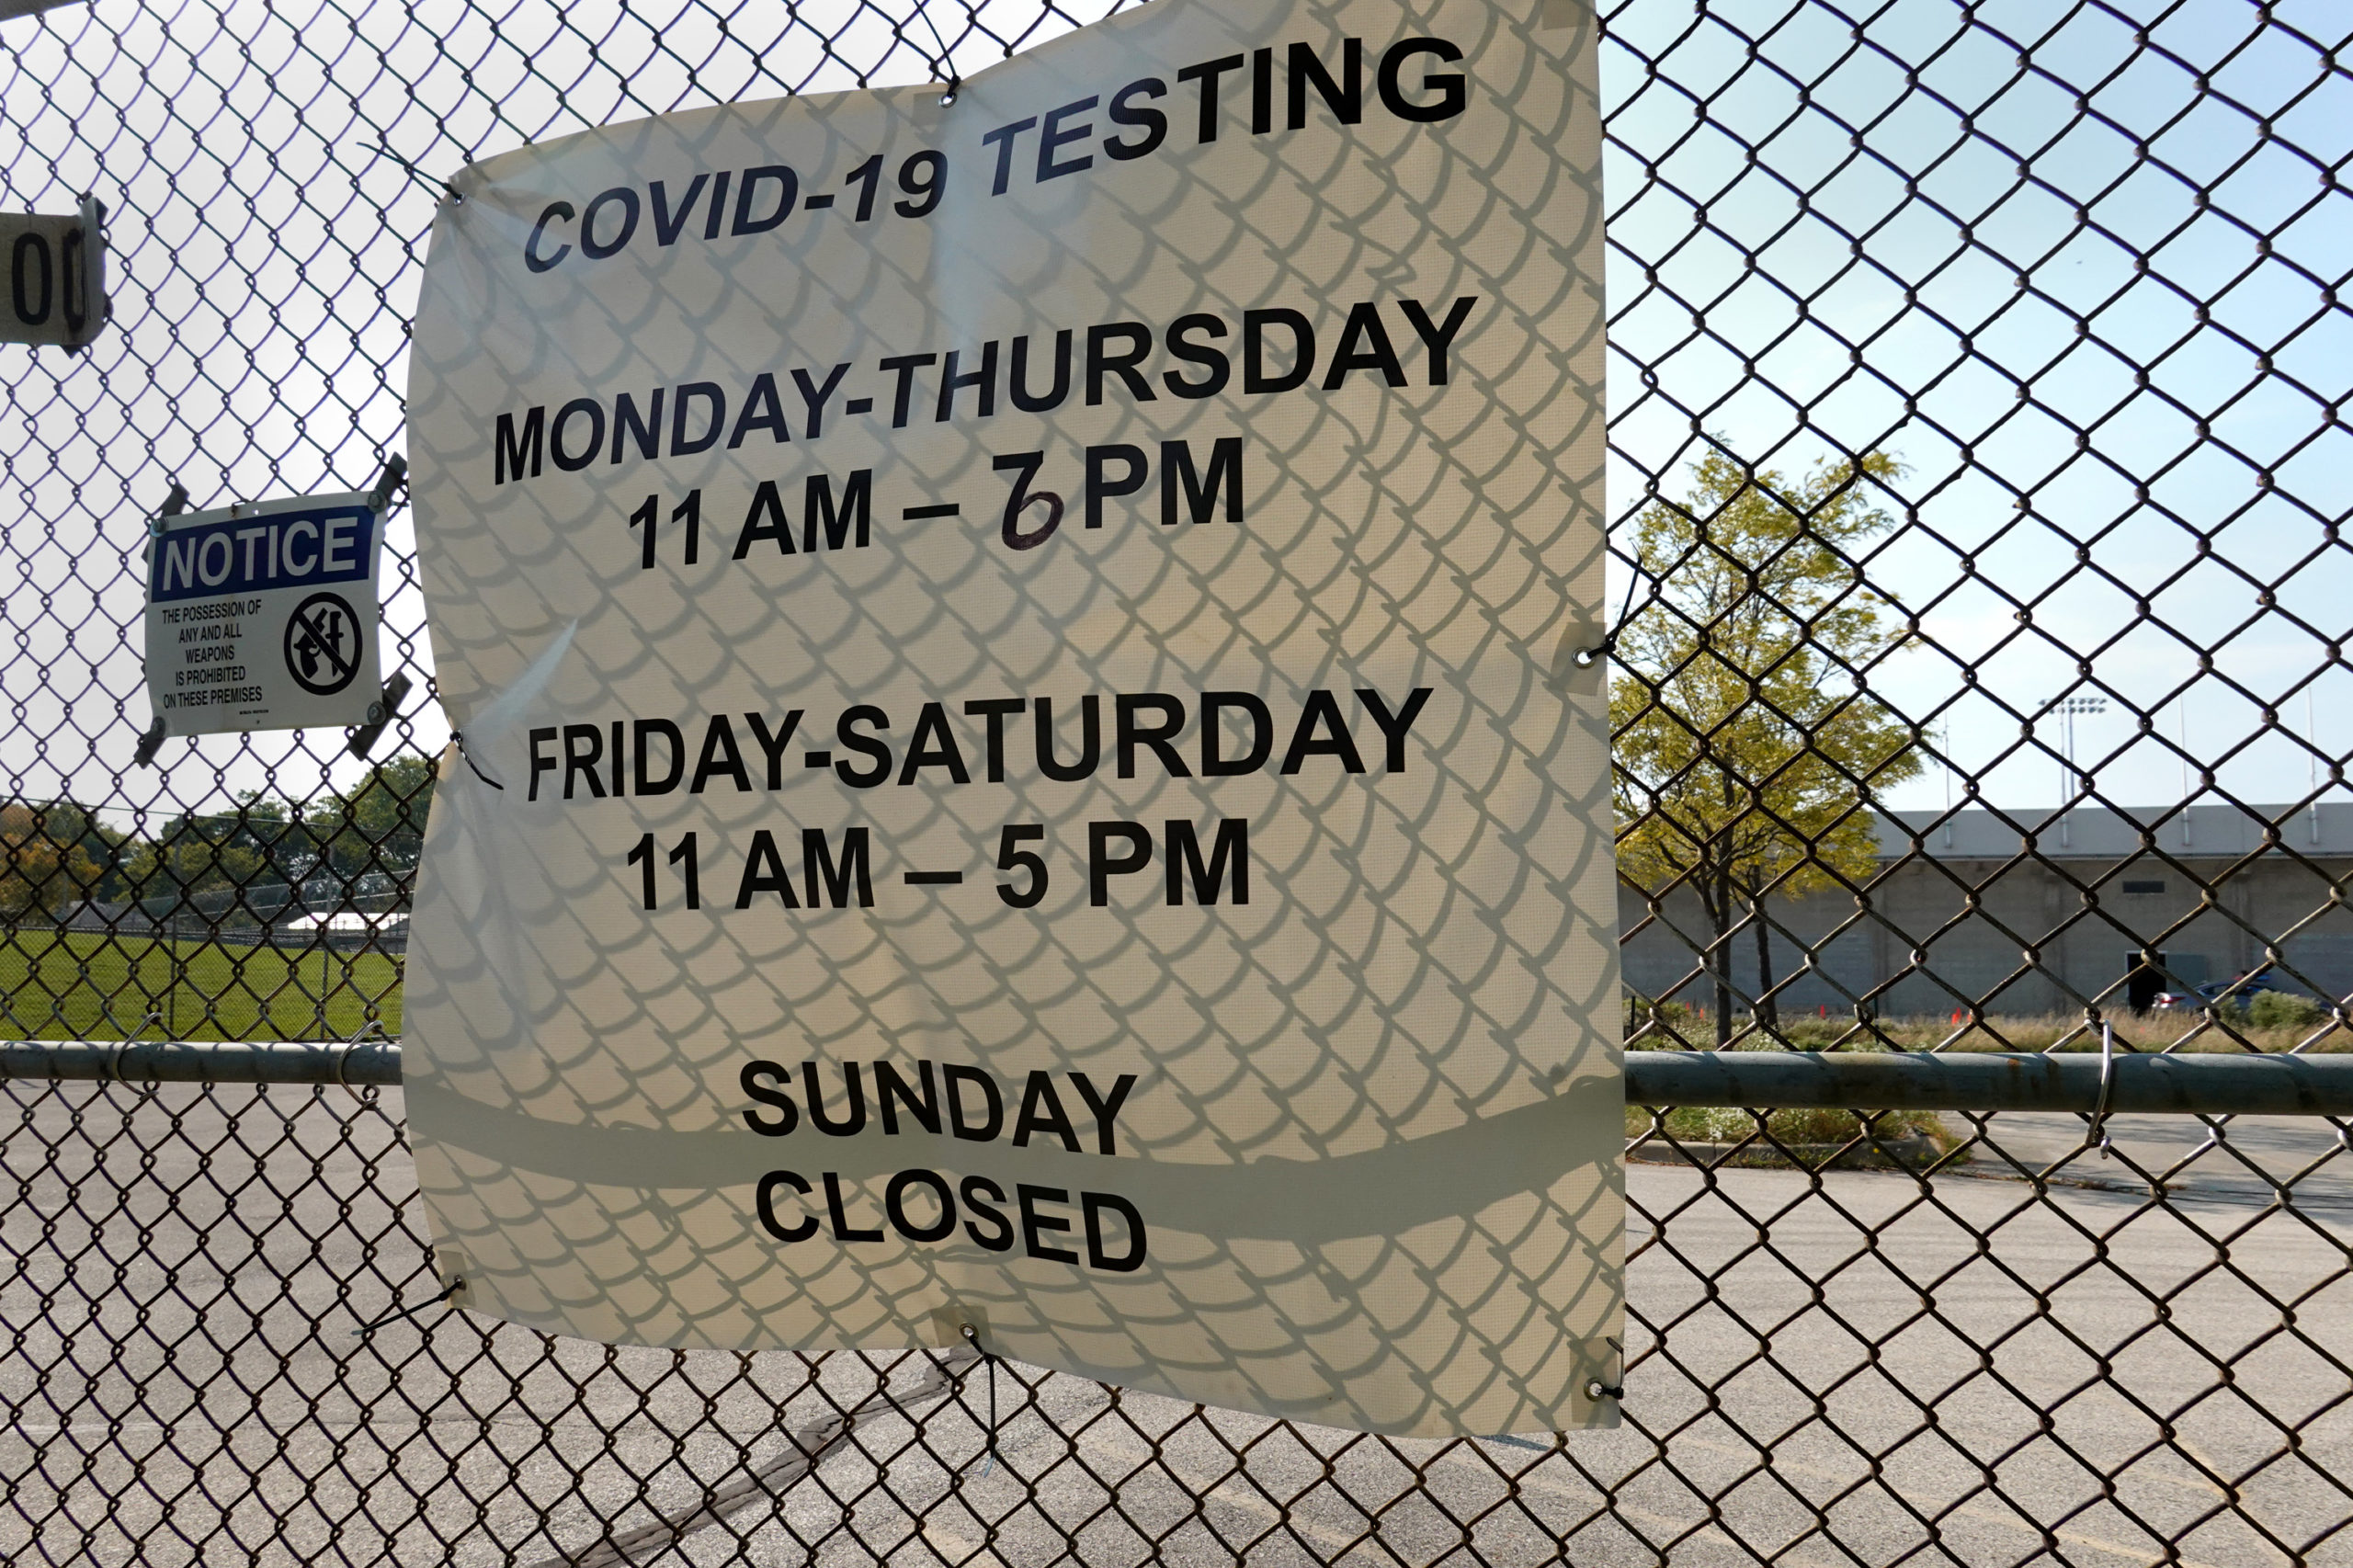 MILWAUKEE, WISCONSIN - OCTOBER 09: A sign hangs on a fence surrounding a temporary test site set up to test for the coronavirus COVID-19 at Barack Obama School on October 09, 2020 in Milwaukee, Wisconsin. Wisconsin currently has one of the highest positivity rates for COVID-19 in the nation. (Photo by Scott Olson/Getty Images)